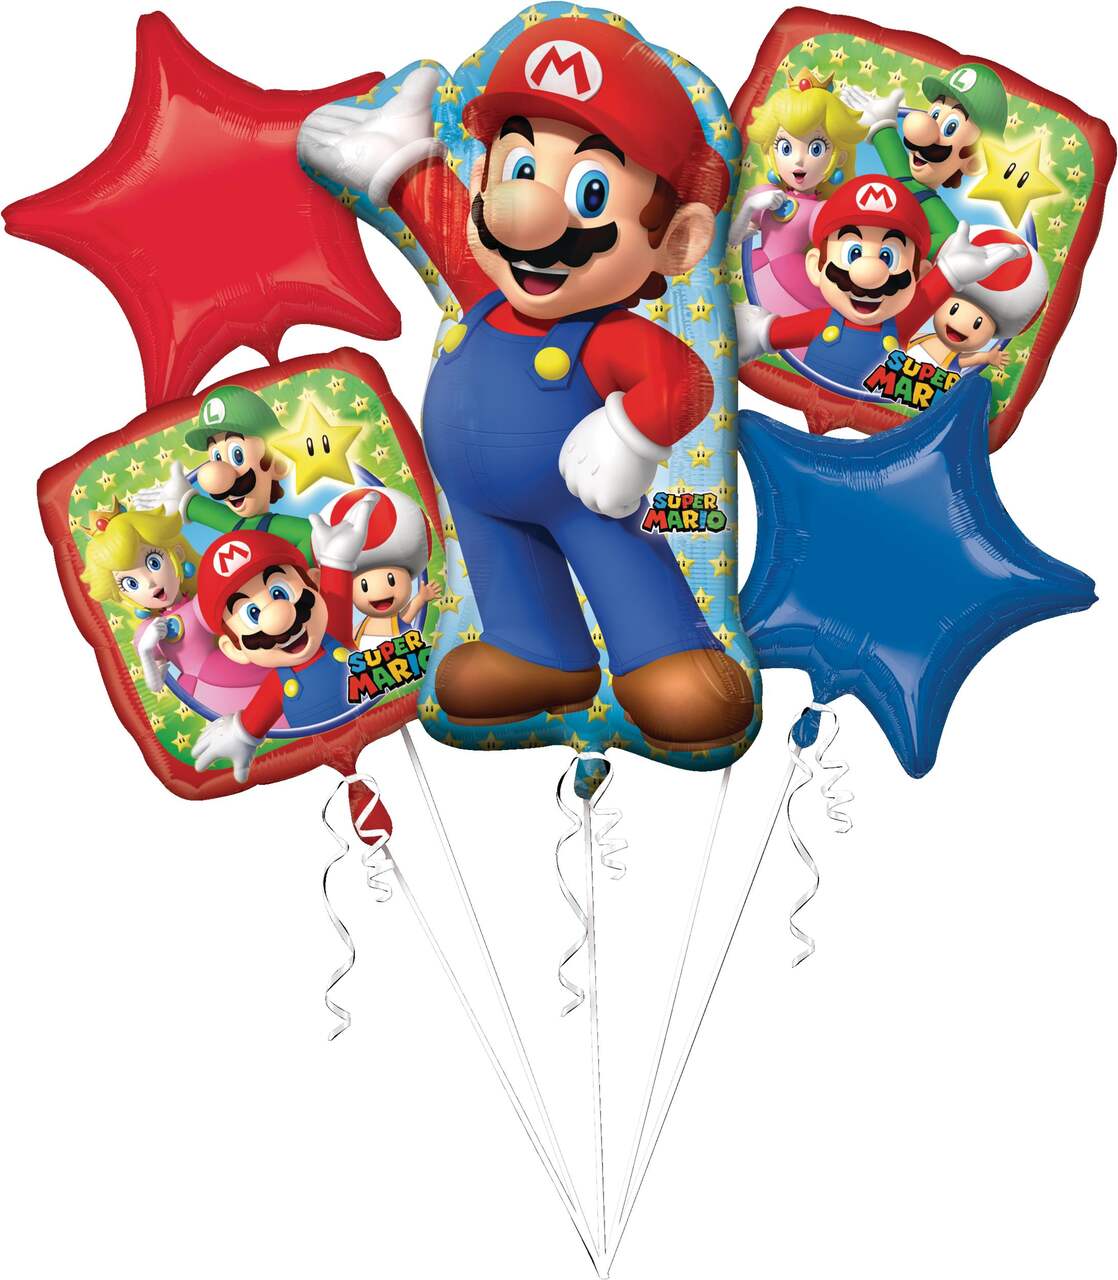 Giant Super Mario Foil Balloon Bouquet for Birthday Party, Helium